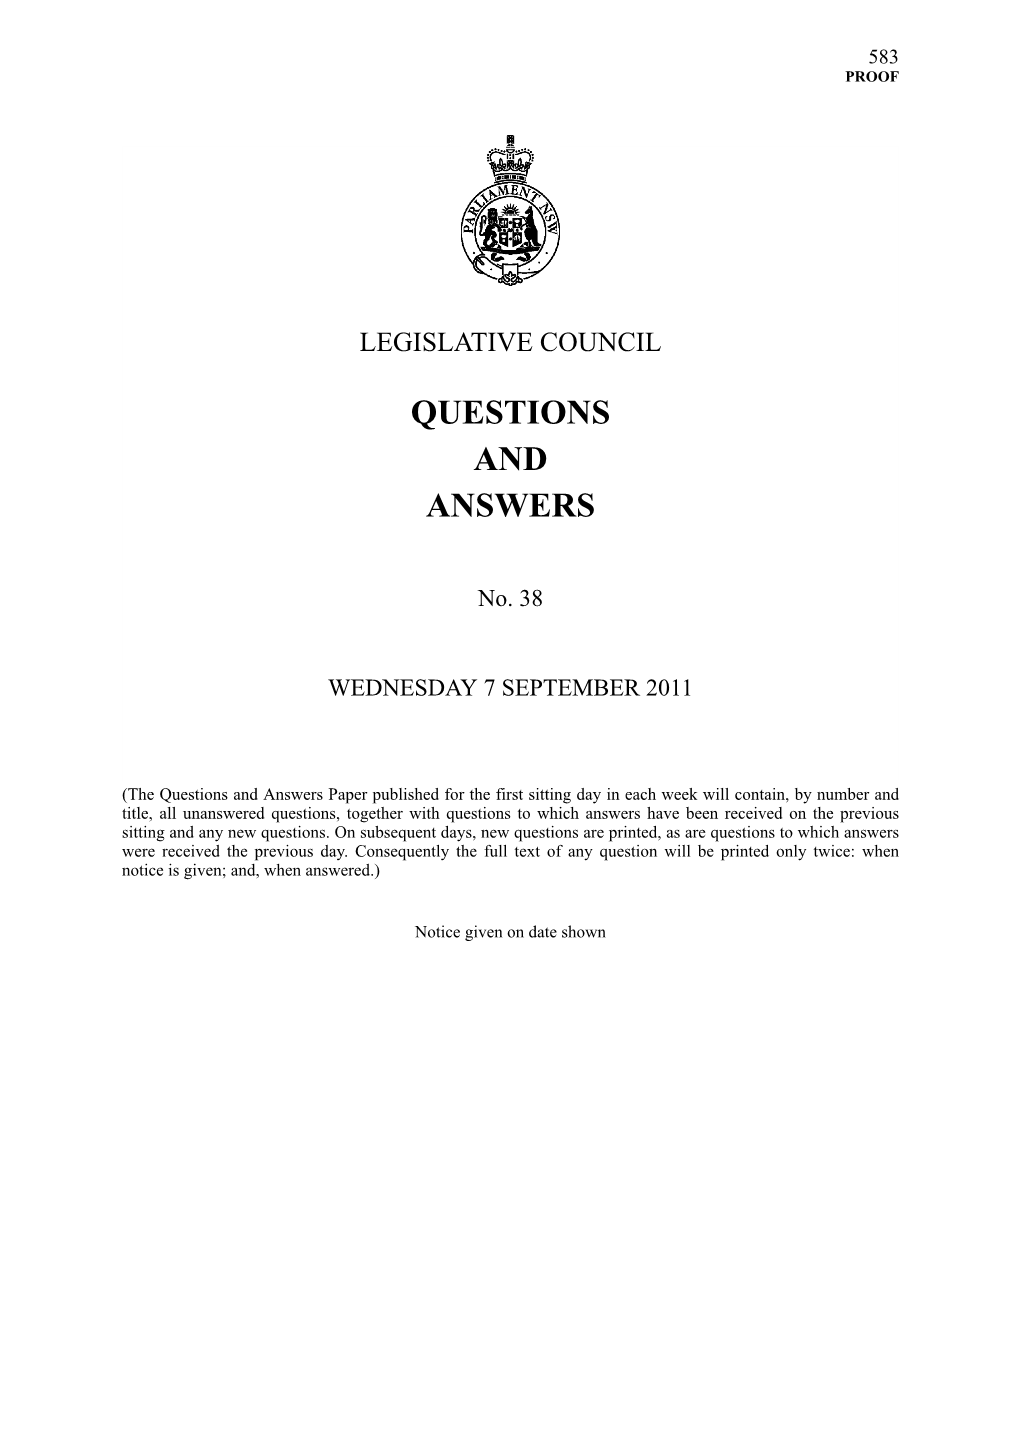 Questions & Answers Paper No. 38